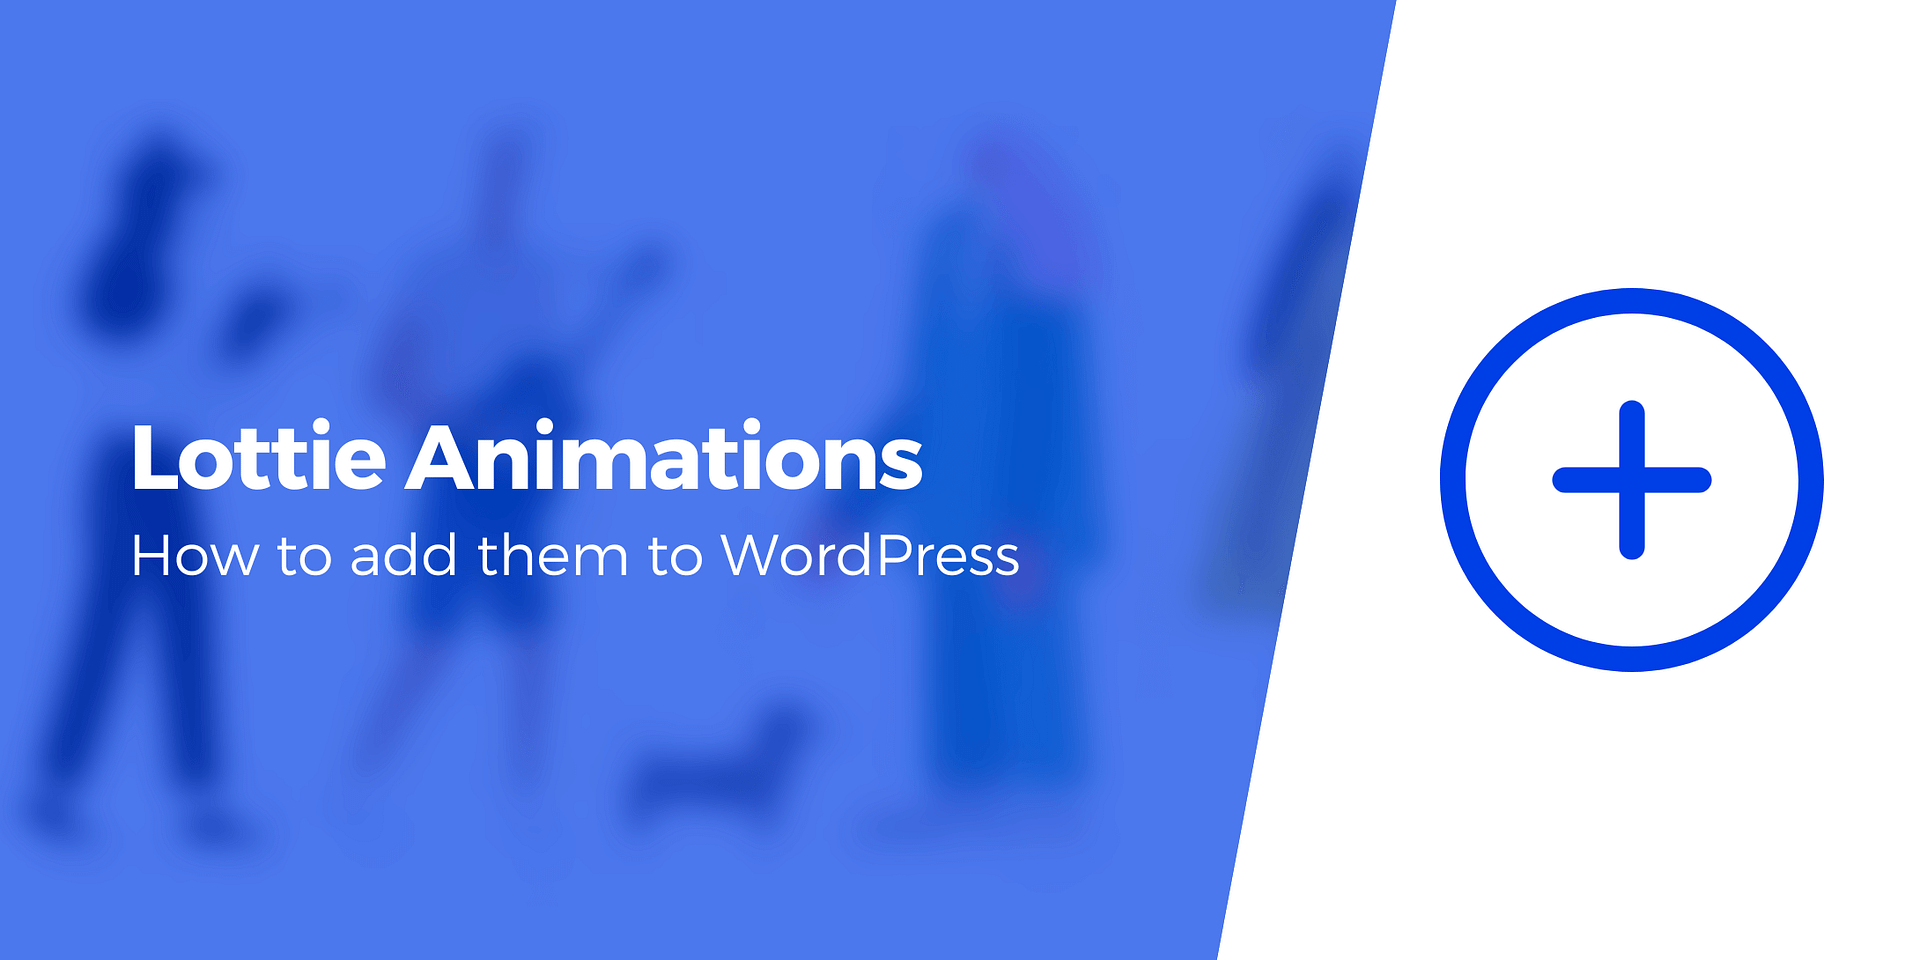 How to Add Lottie Animations in WordPress (4 Simple Steps)